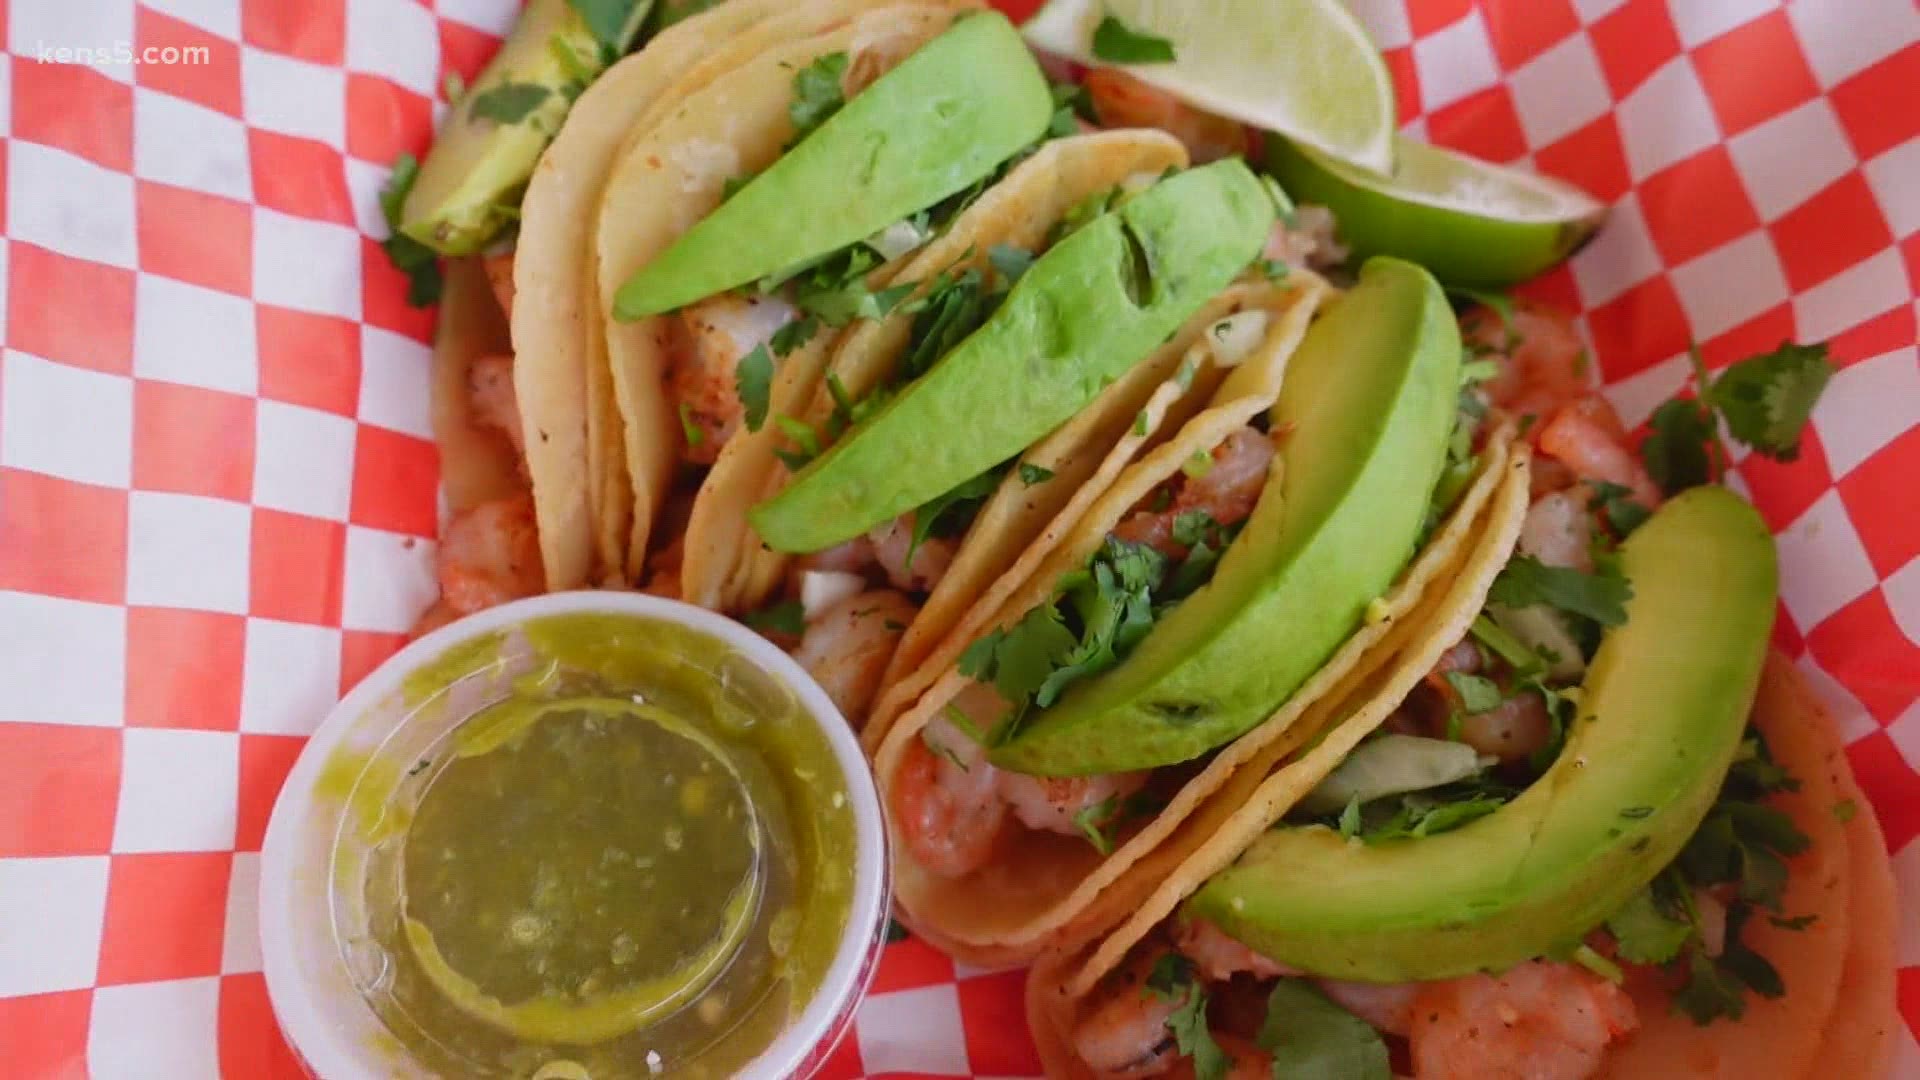 A Rio Grande Valley family is bringing a fresh twist on tacos to the Alamo City at Gordo's Mini Tacos and Snacks.